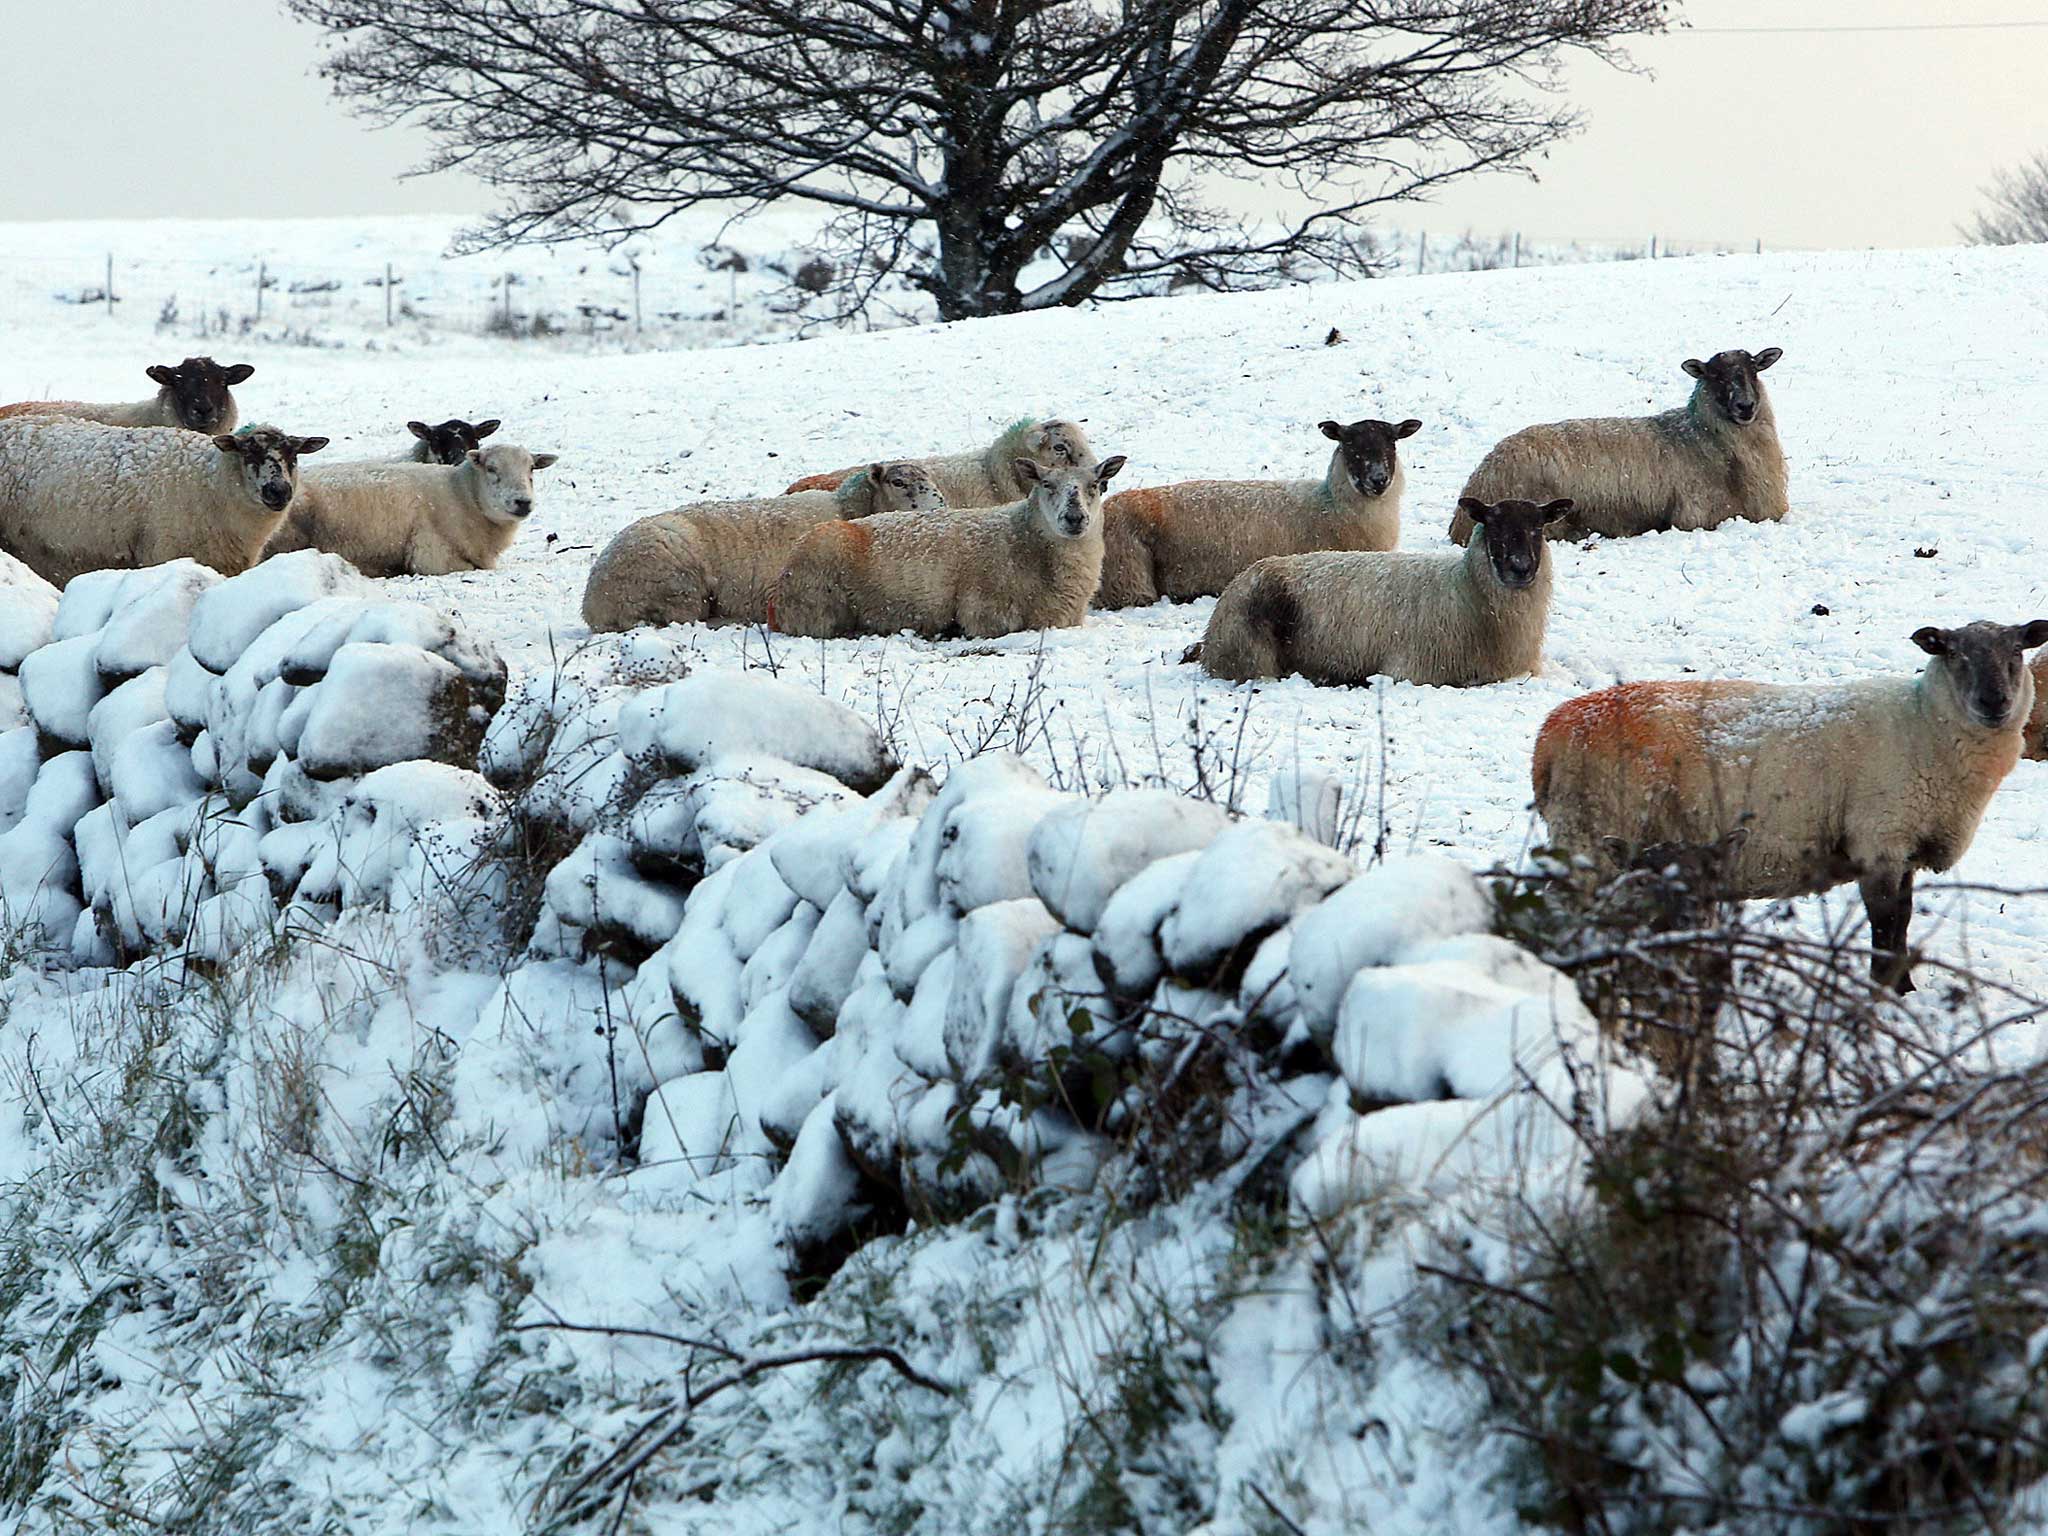 Sheep in the hills above Glenarm in Co Antrim, as the first snowfall of the season covered parts of the county